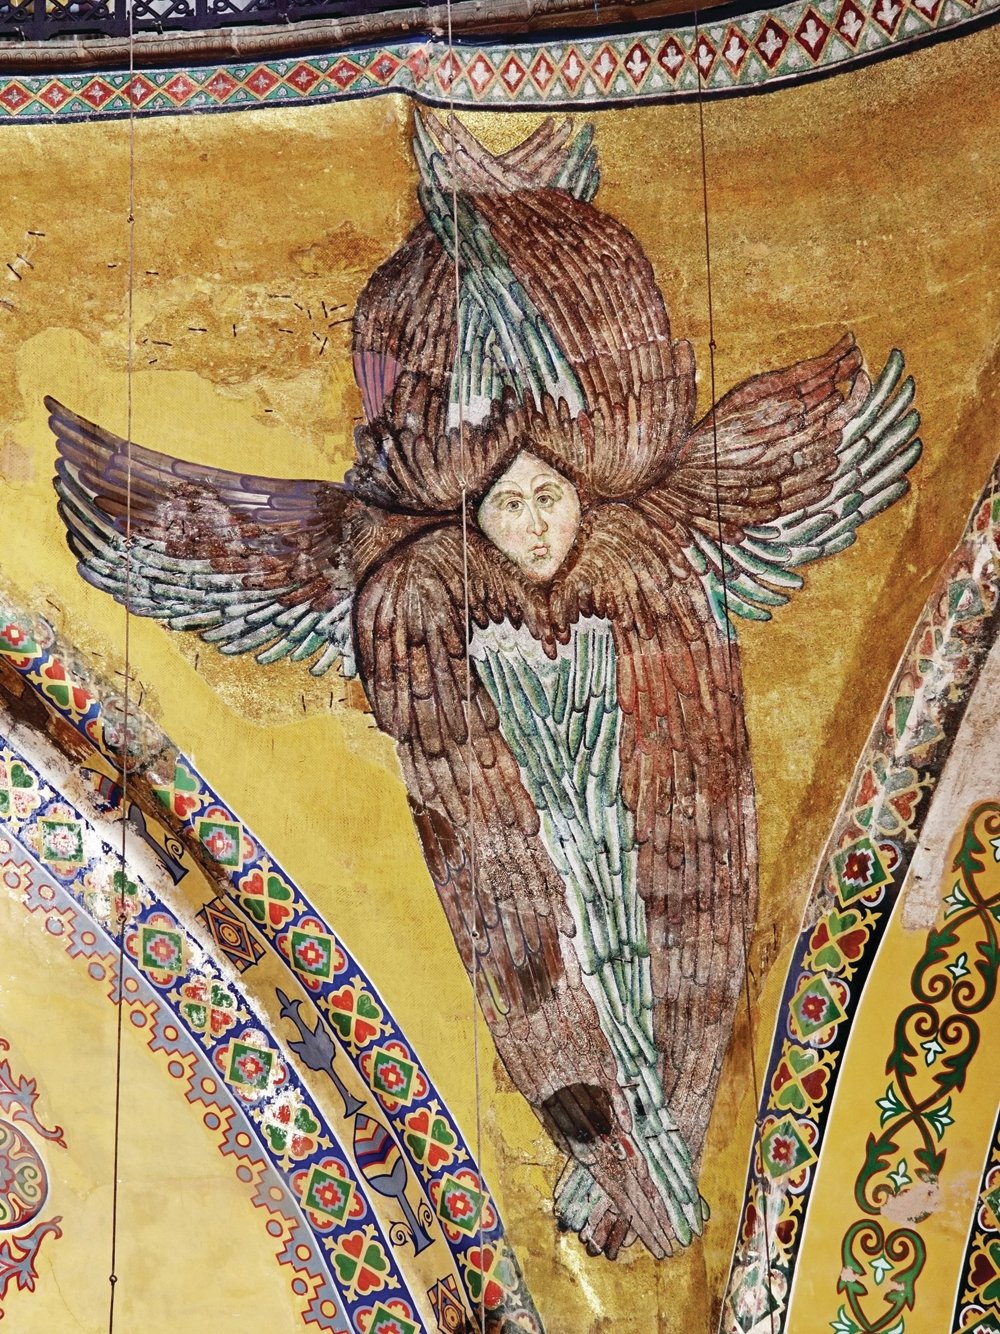 Hagia Sofia restoration reveals face of a seraph angel mosaic - Architectural Review